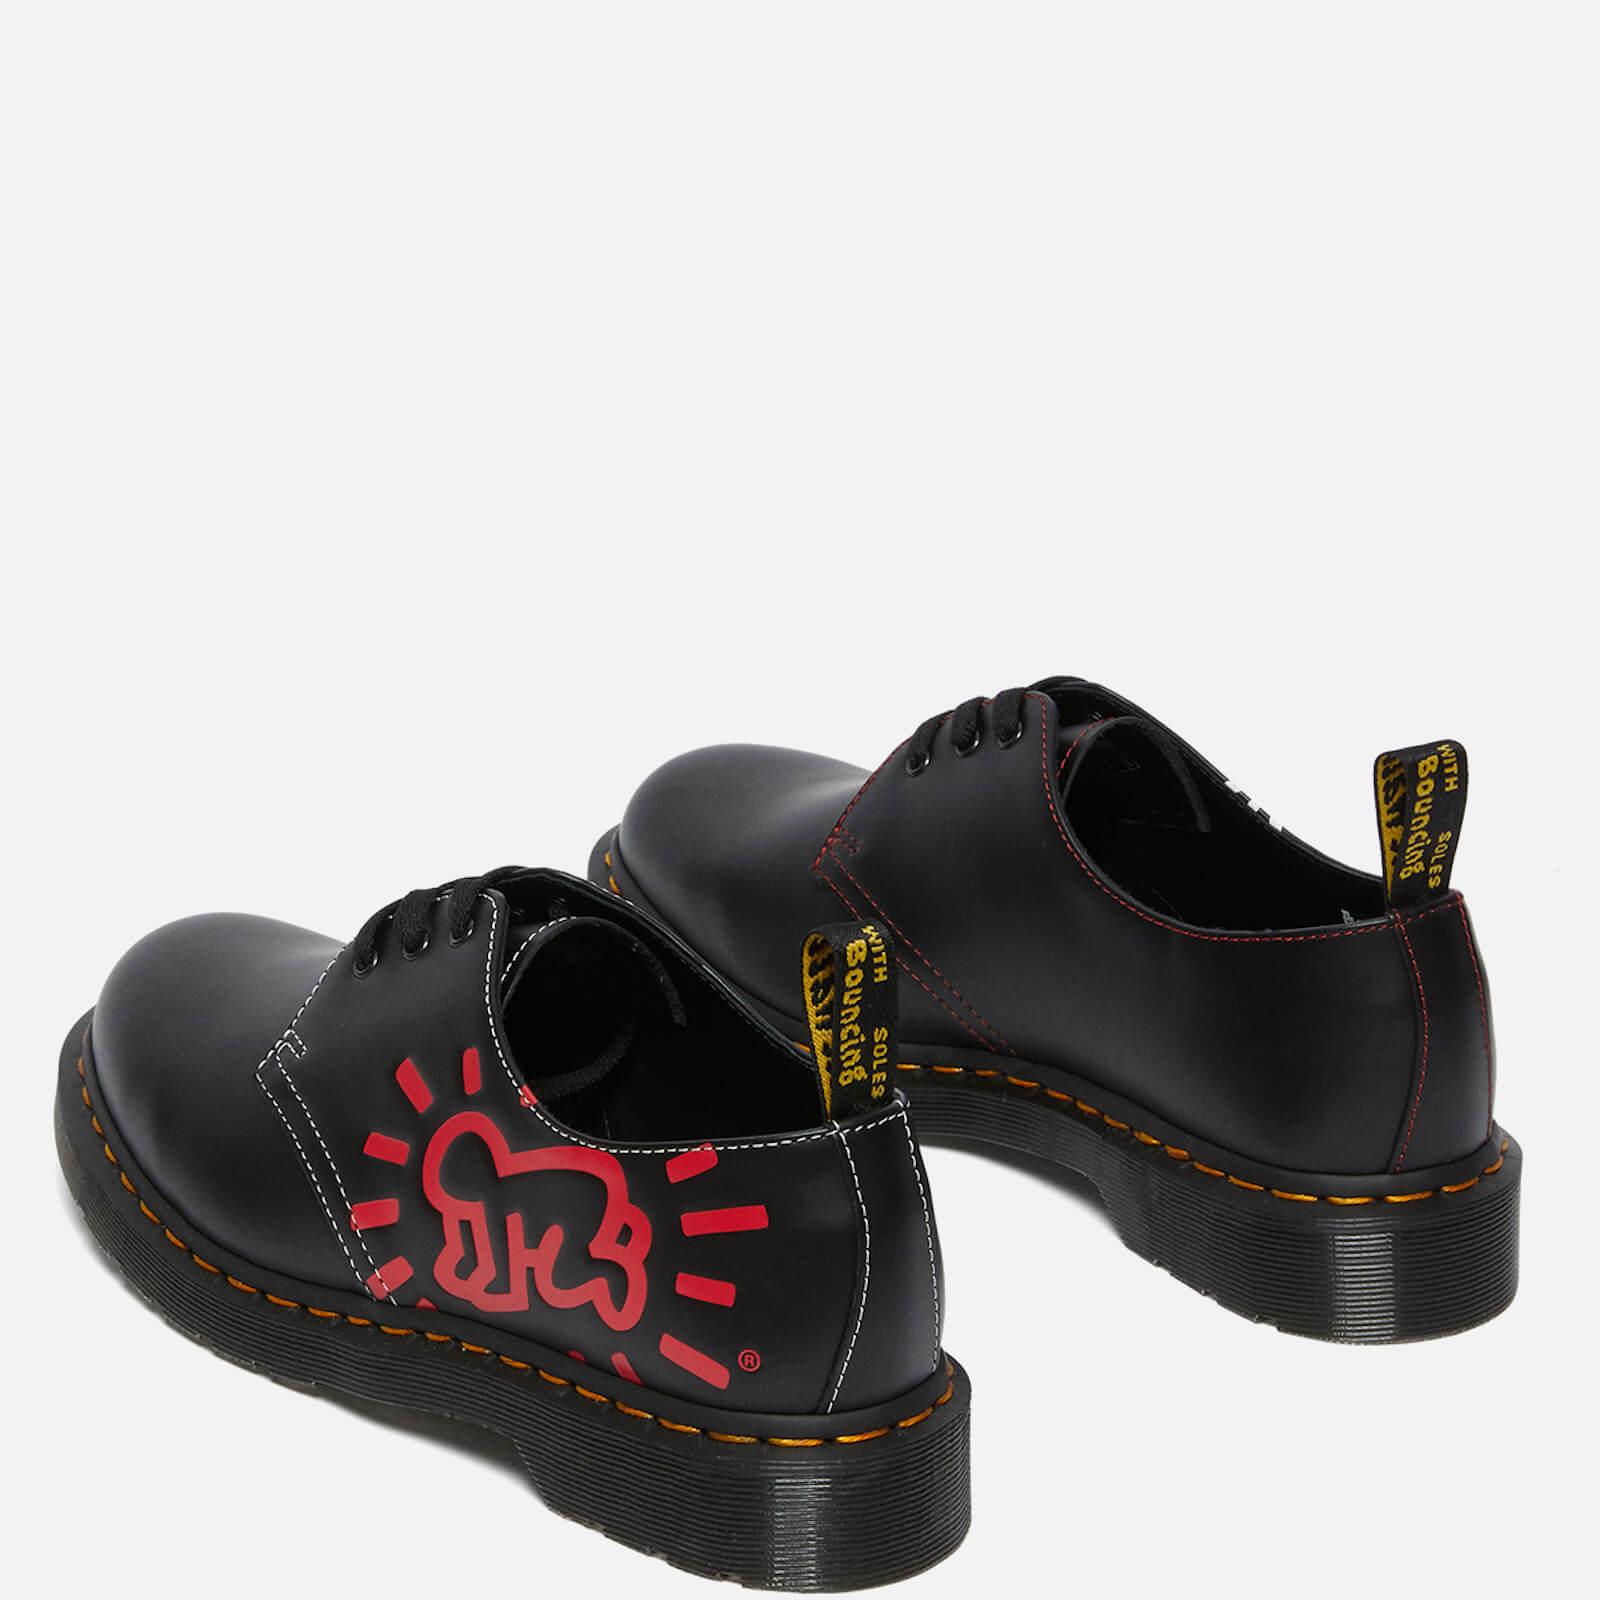 Dr. Martens X Keith Haring 1461 Smooth Leather 3-eye Shoes in Black - Lyst